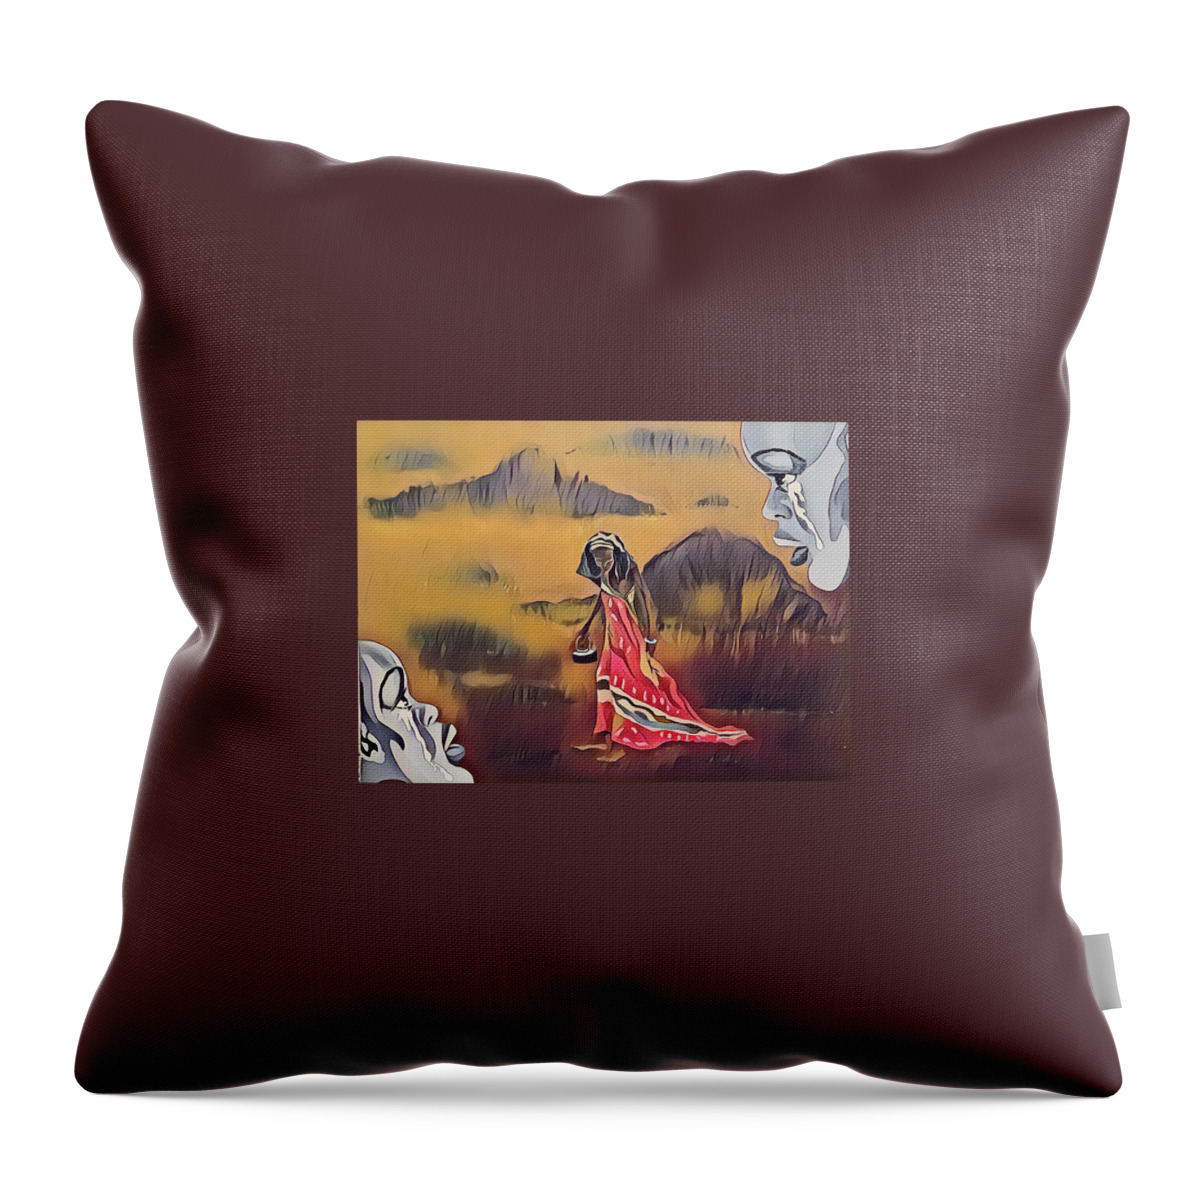  Throw Pillow featuring the painting Dry by Try Cheatham